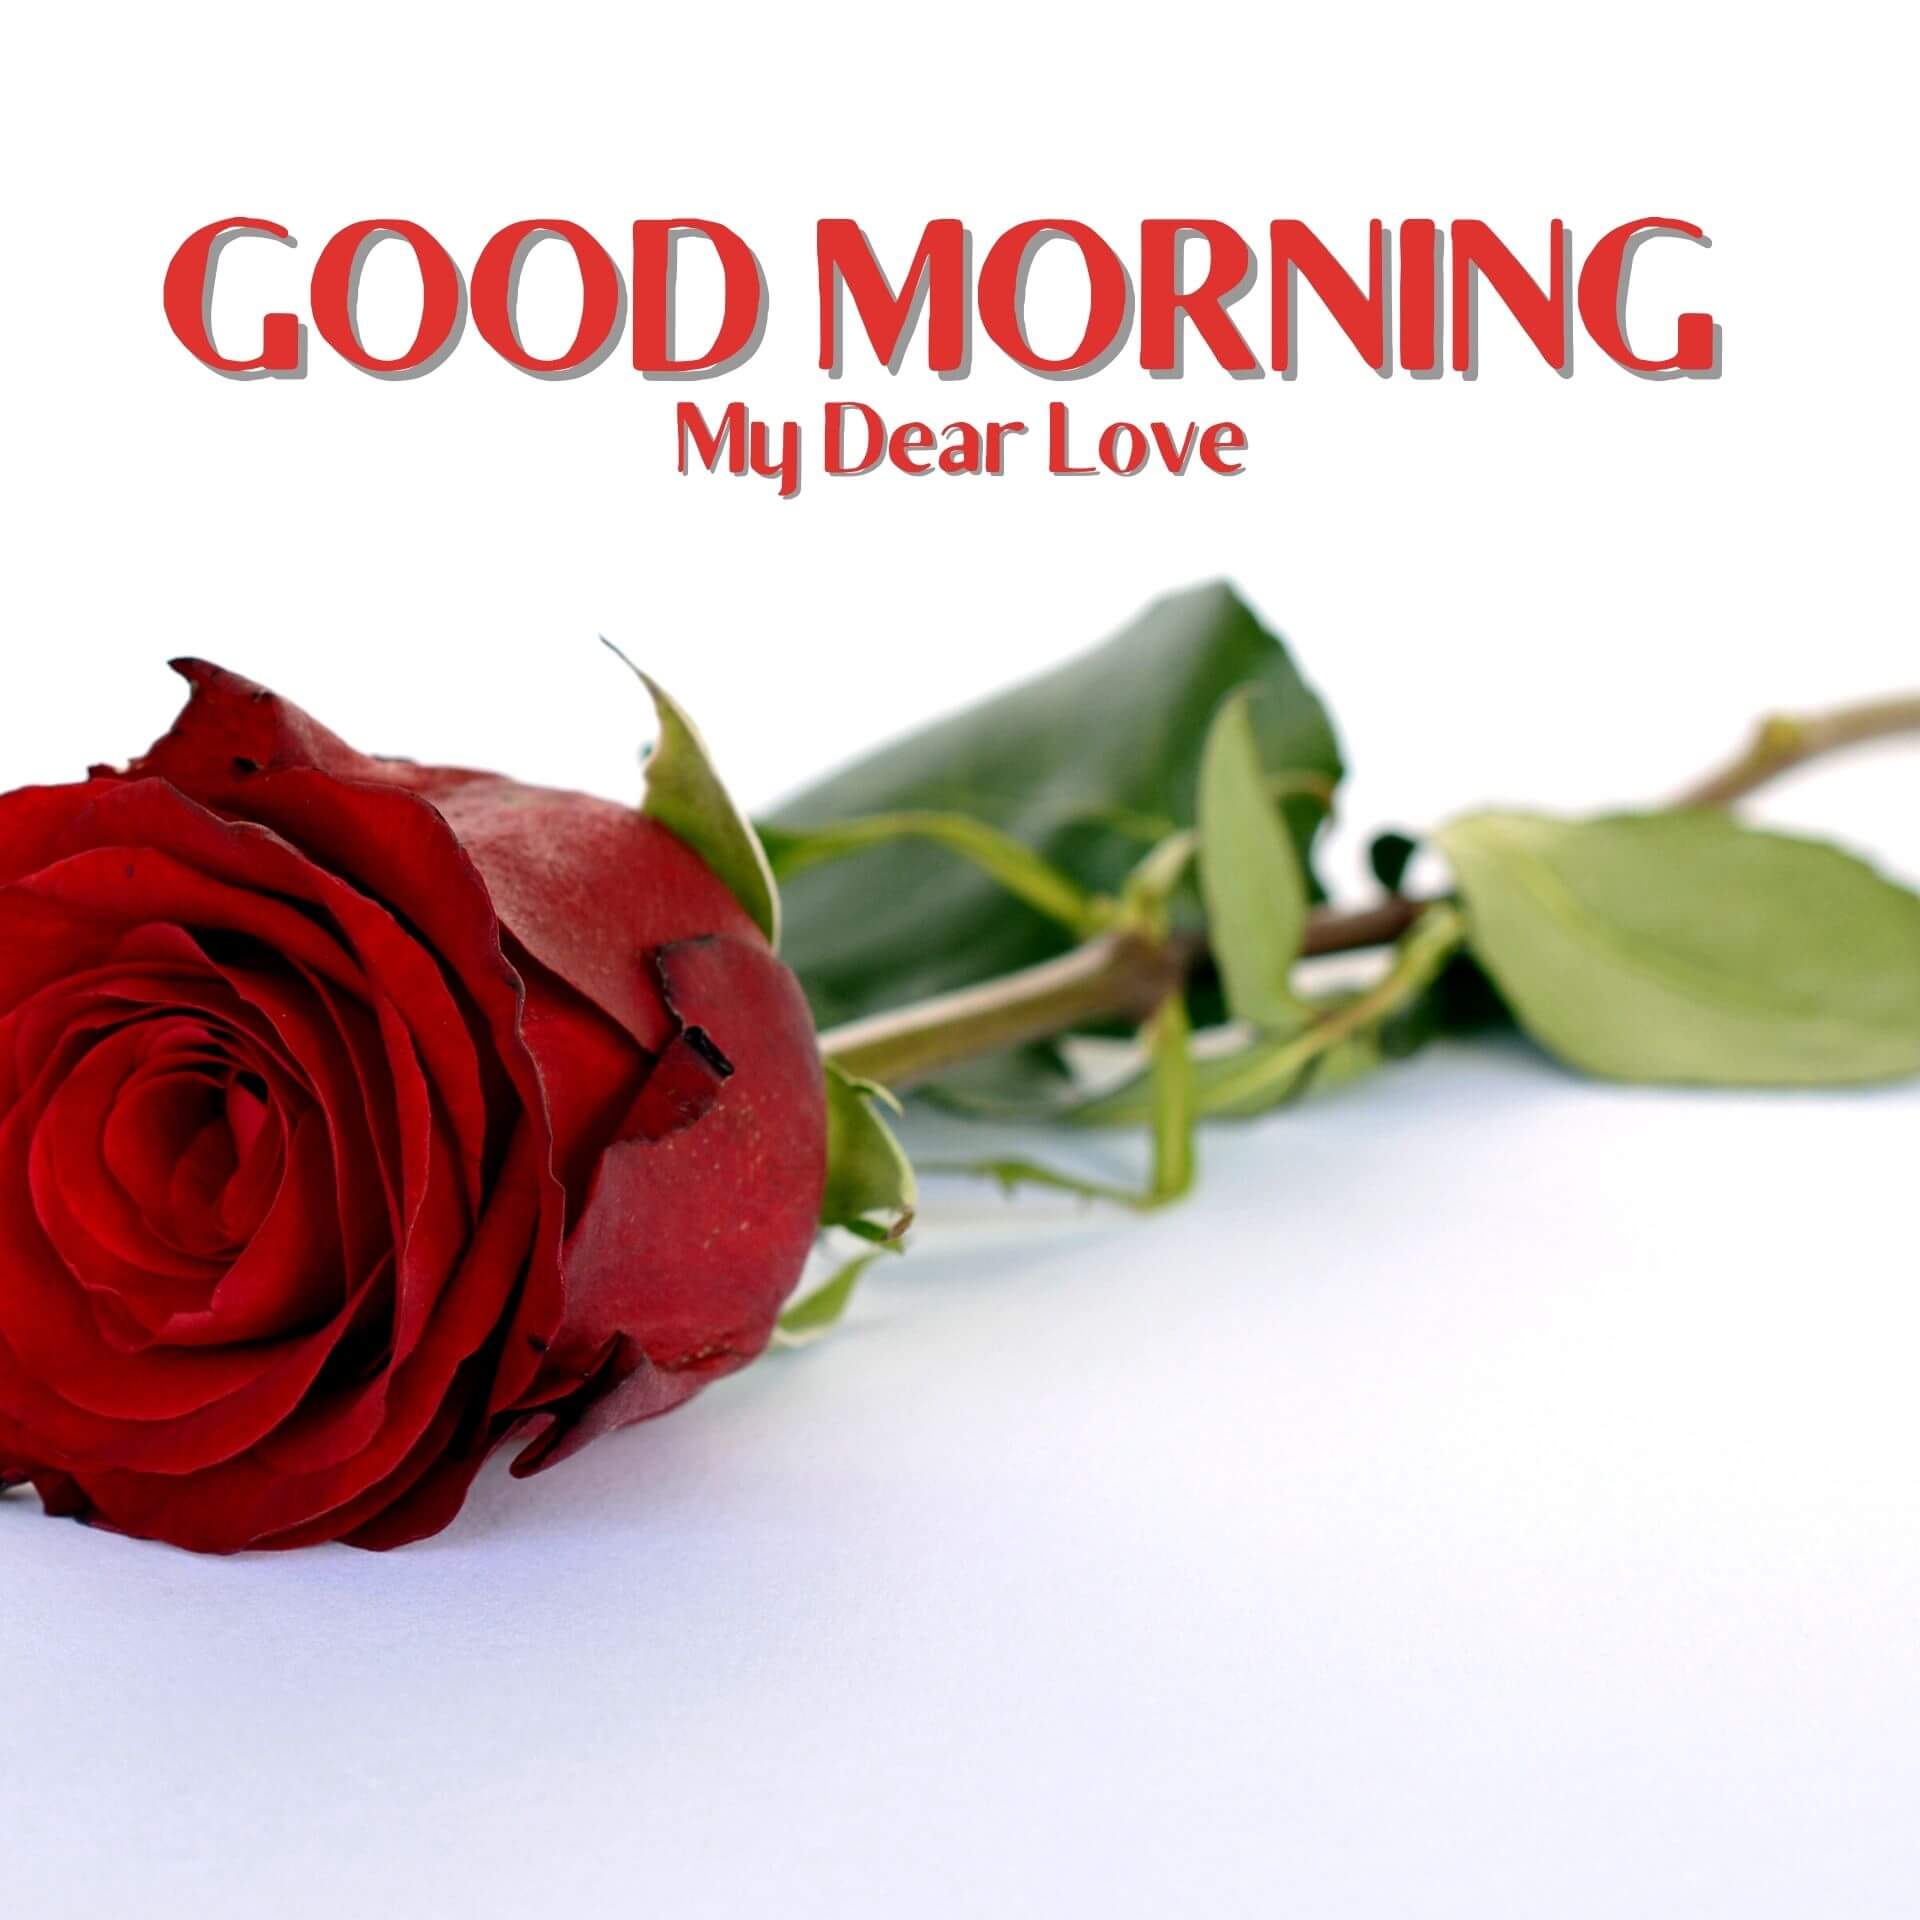 Romantic Good Morning Pics Images With Red Rose